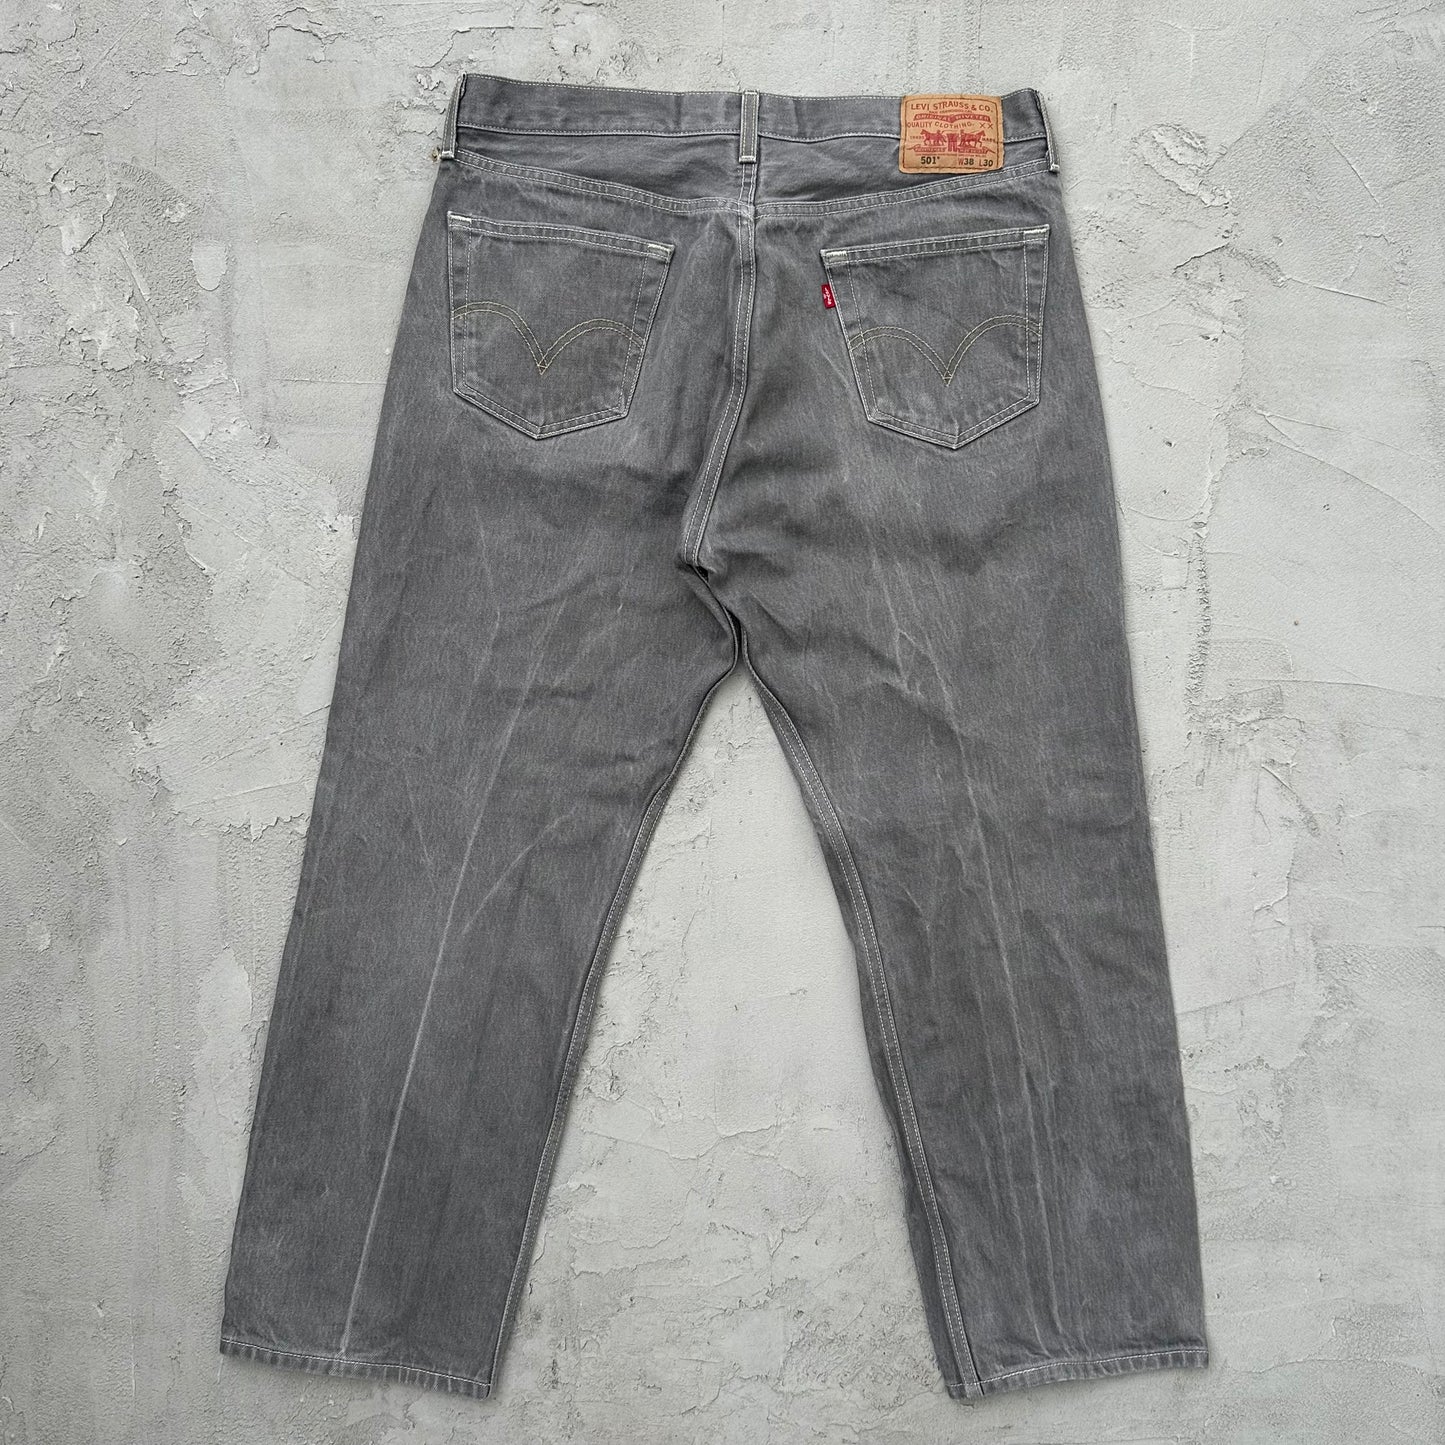 Levi’s 501 Gray Button Fly Jeans 38x30